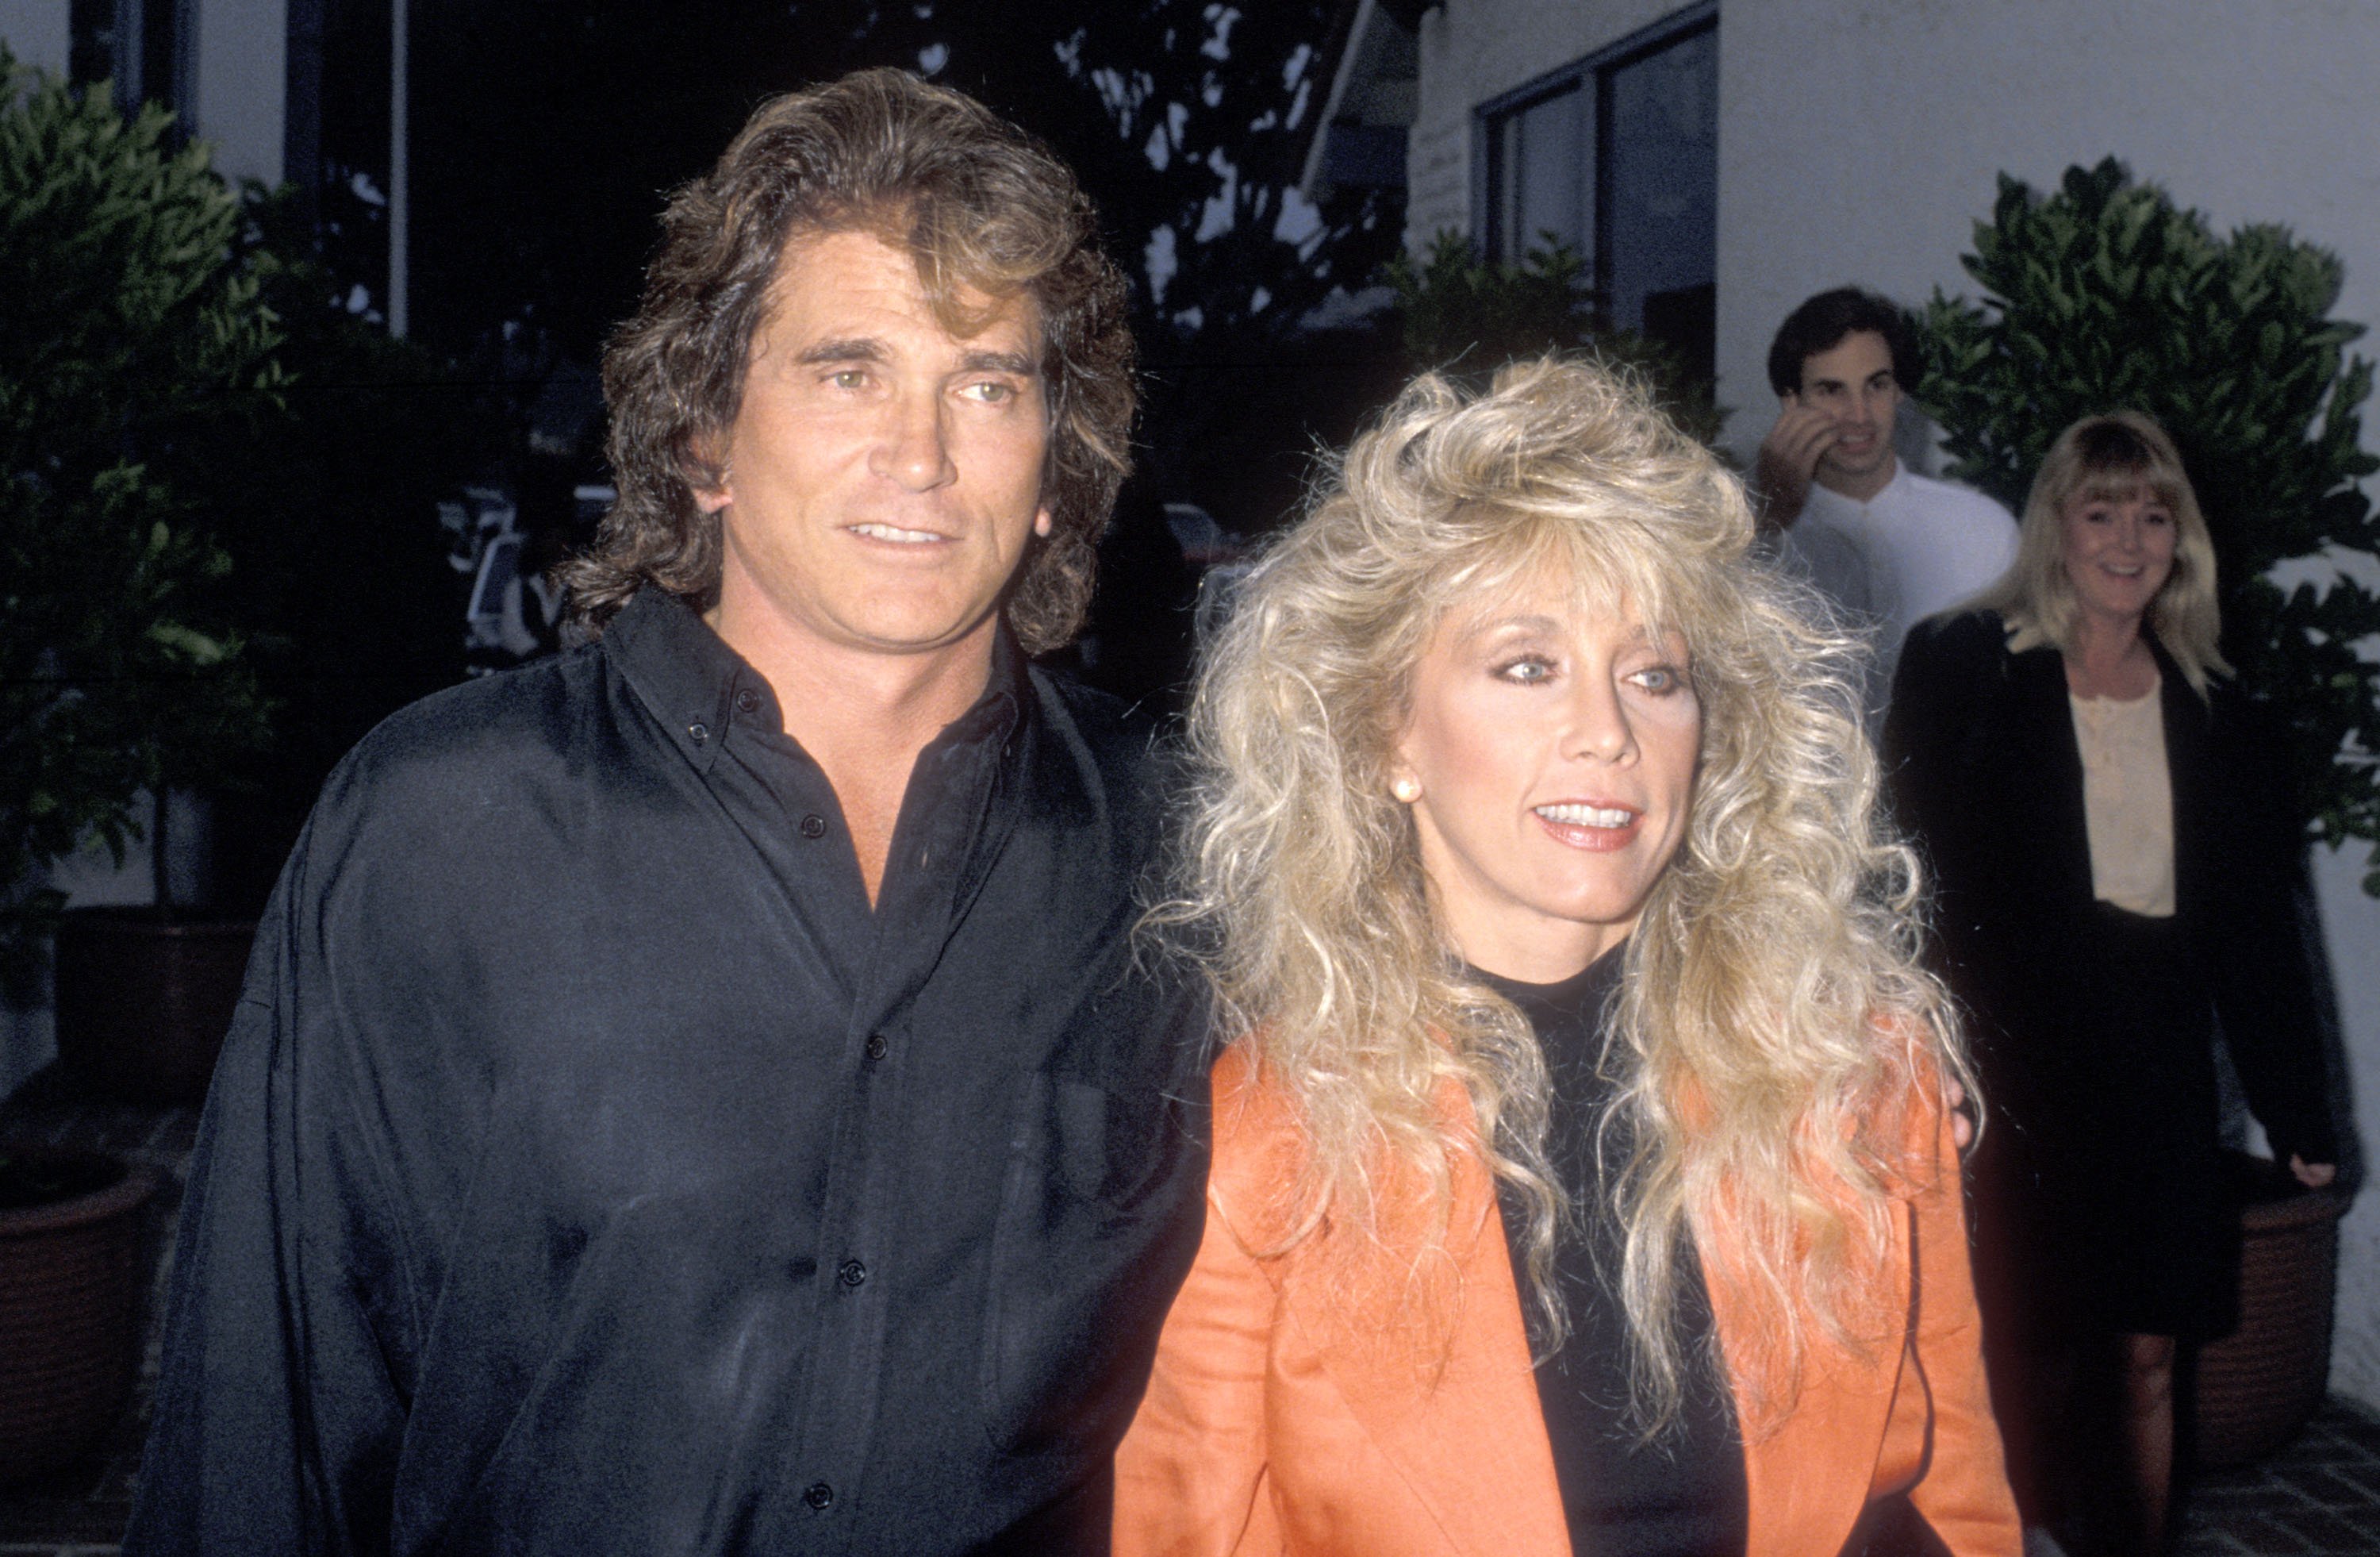 Michael Landon wears a black shirt and stands next to his third wife, Cindy Landon, who is wearing an orange jacket.